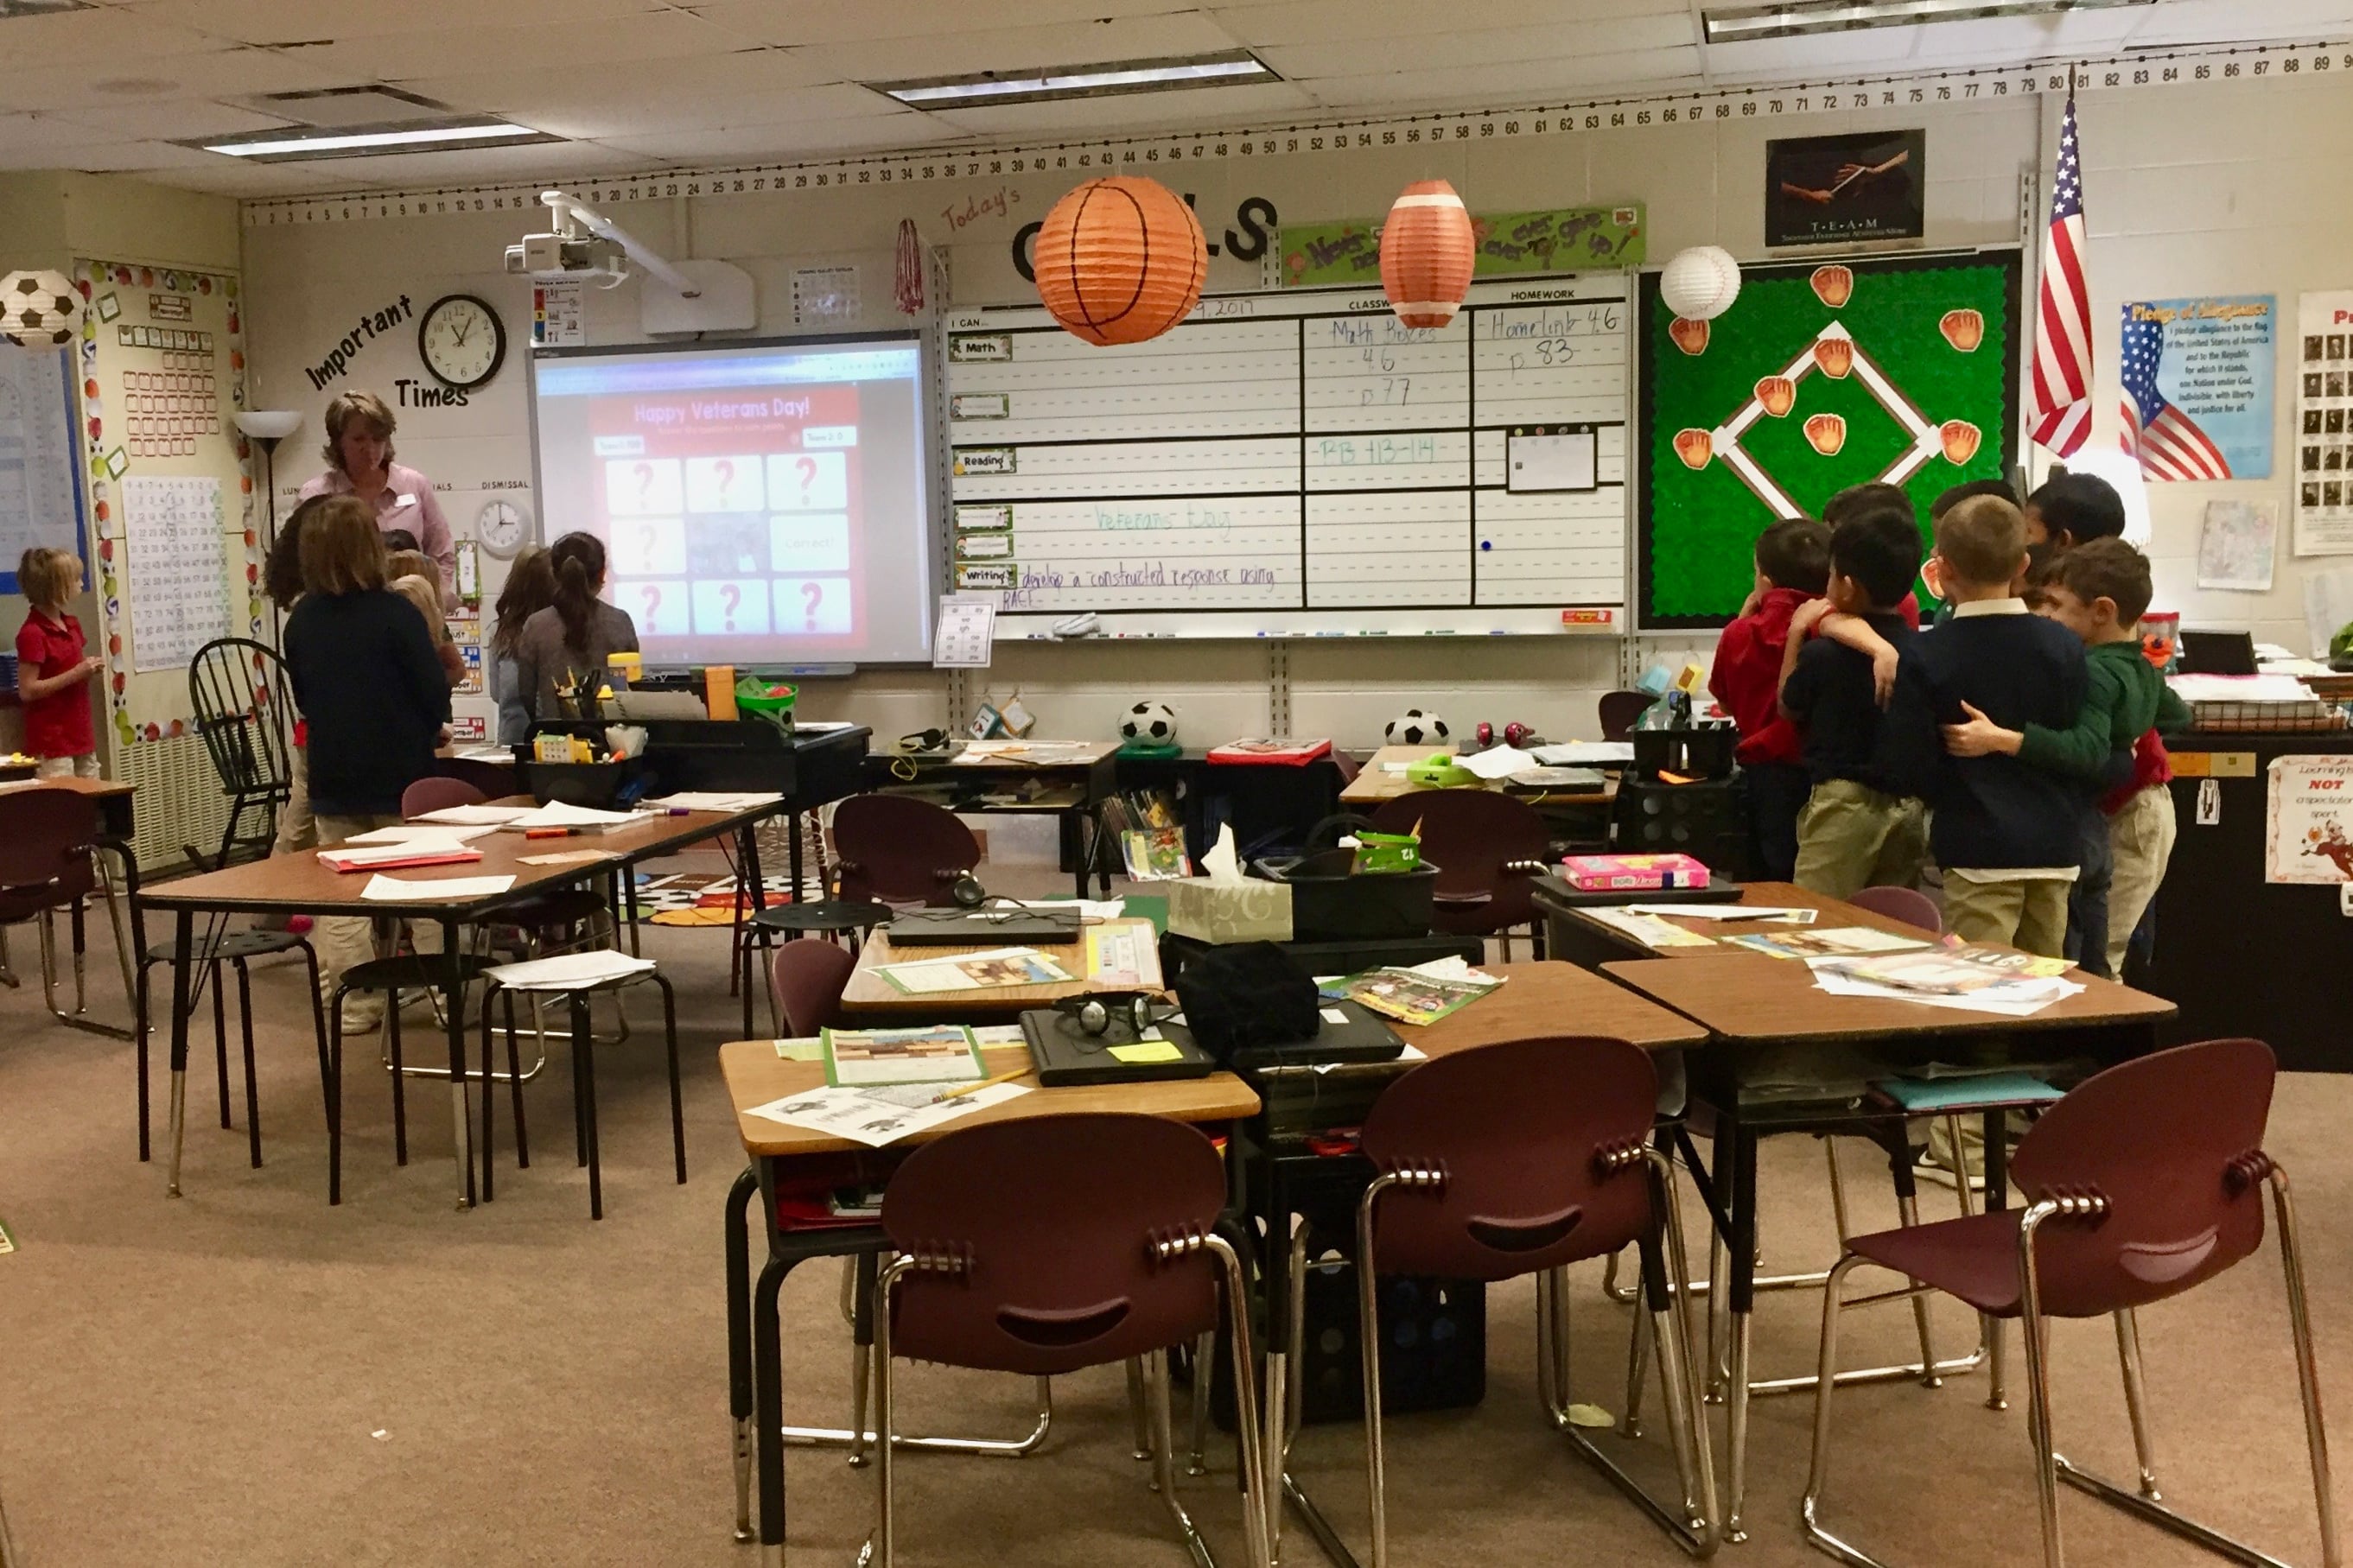 A group of elementary students stand huddled on one side of a classroom amid desks. On the other side of the classroom, a teacher speaks to another group of students looking at a projector.